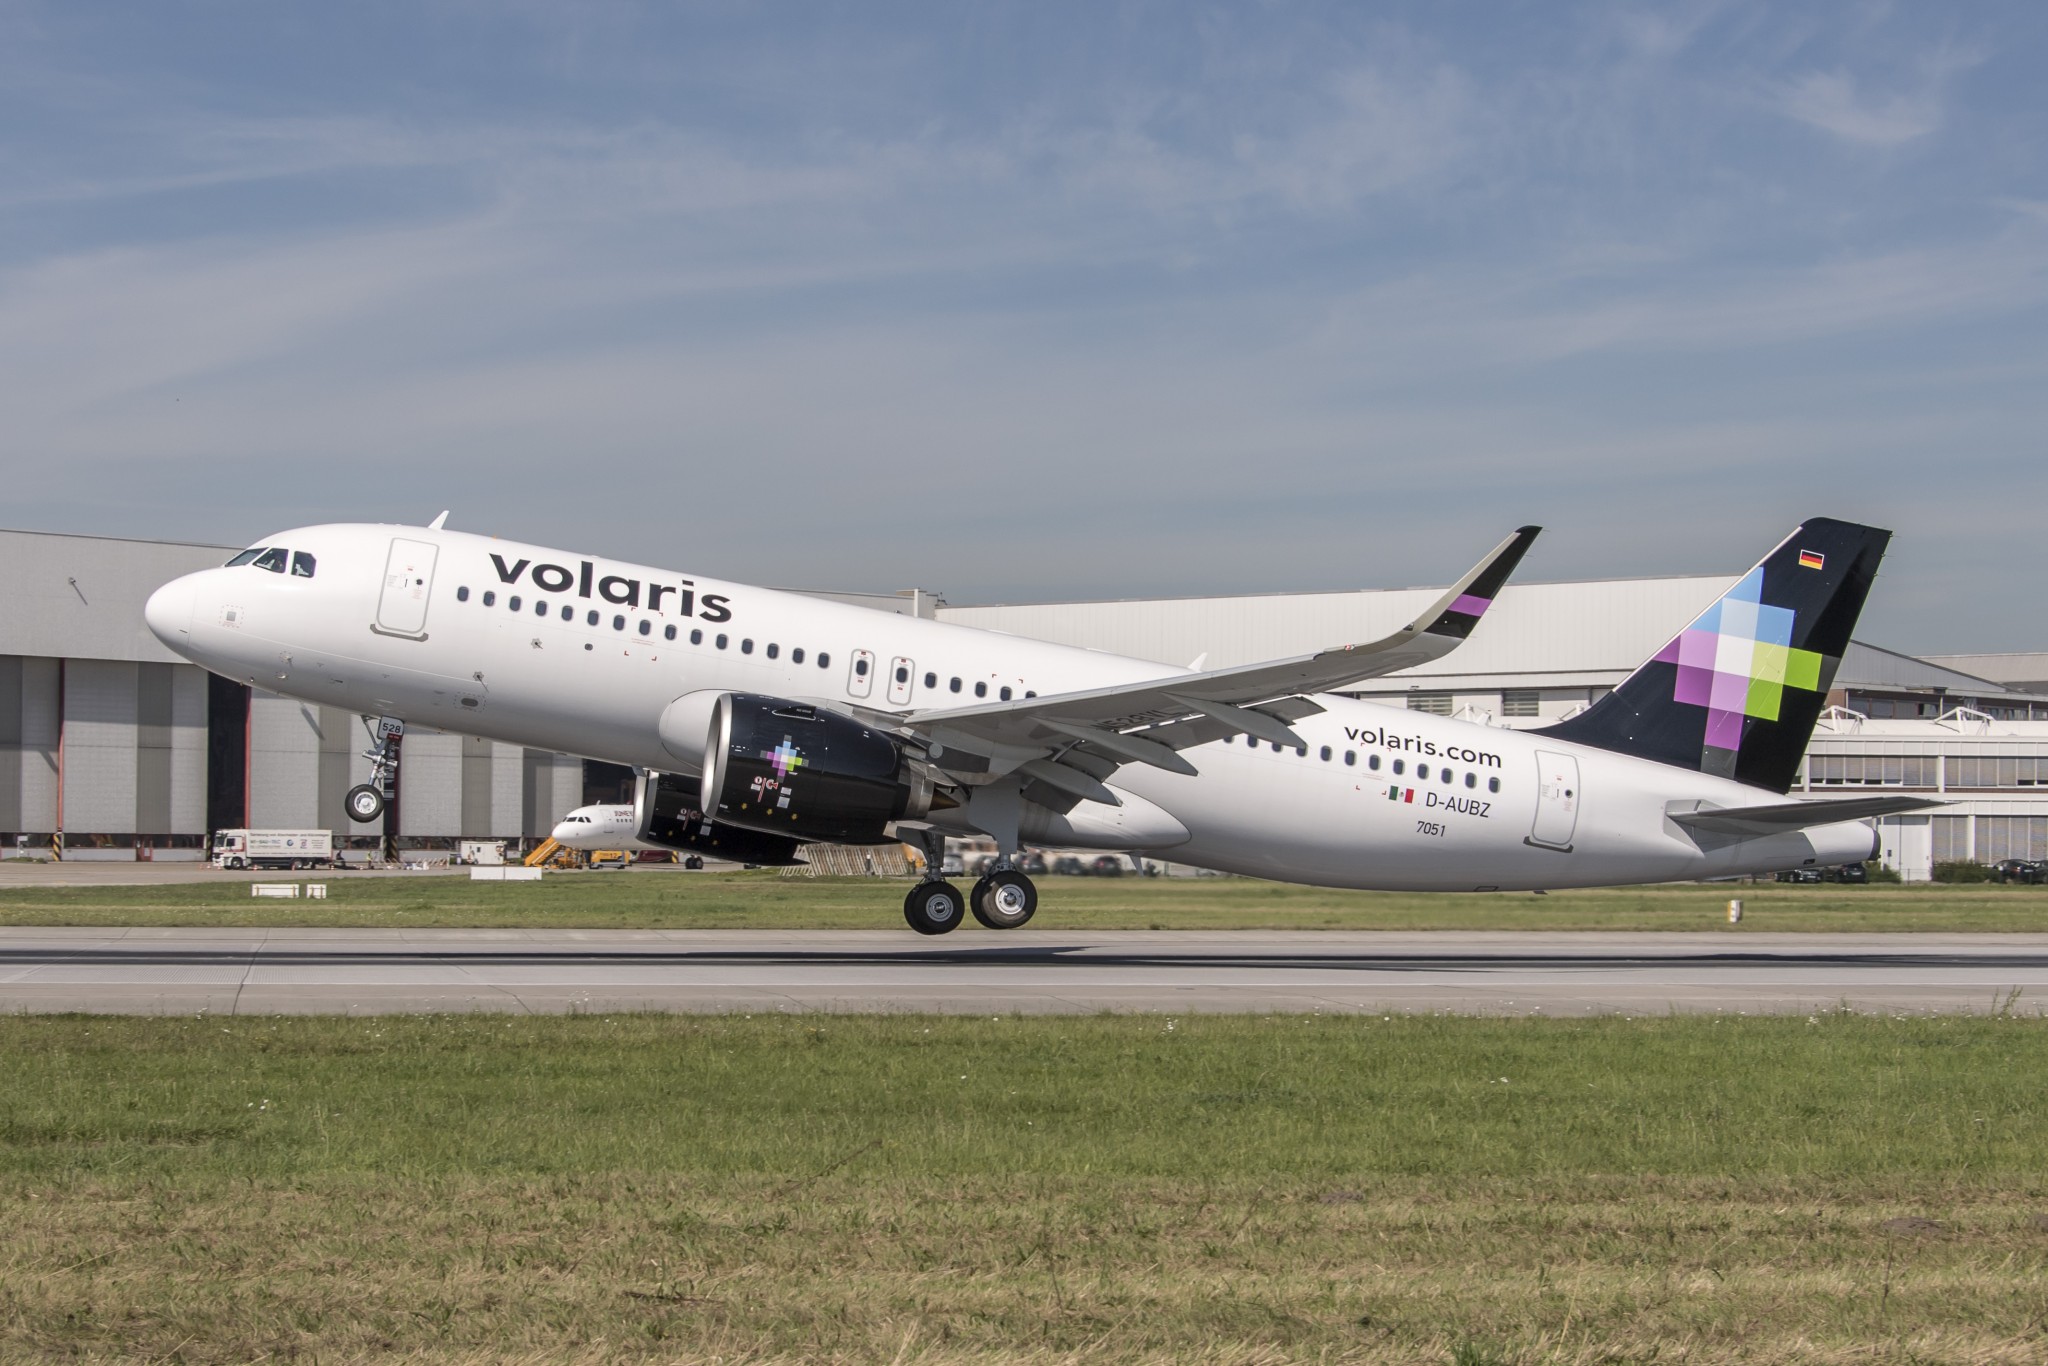 Volaris reports 2.8 million passengers in March as overseas demand climbs